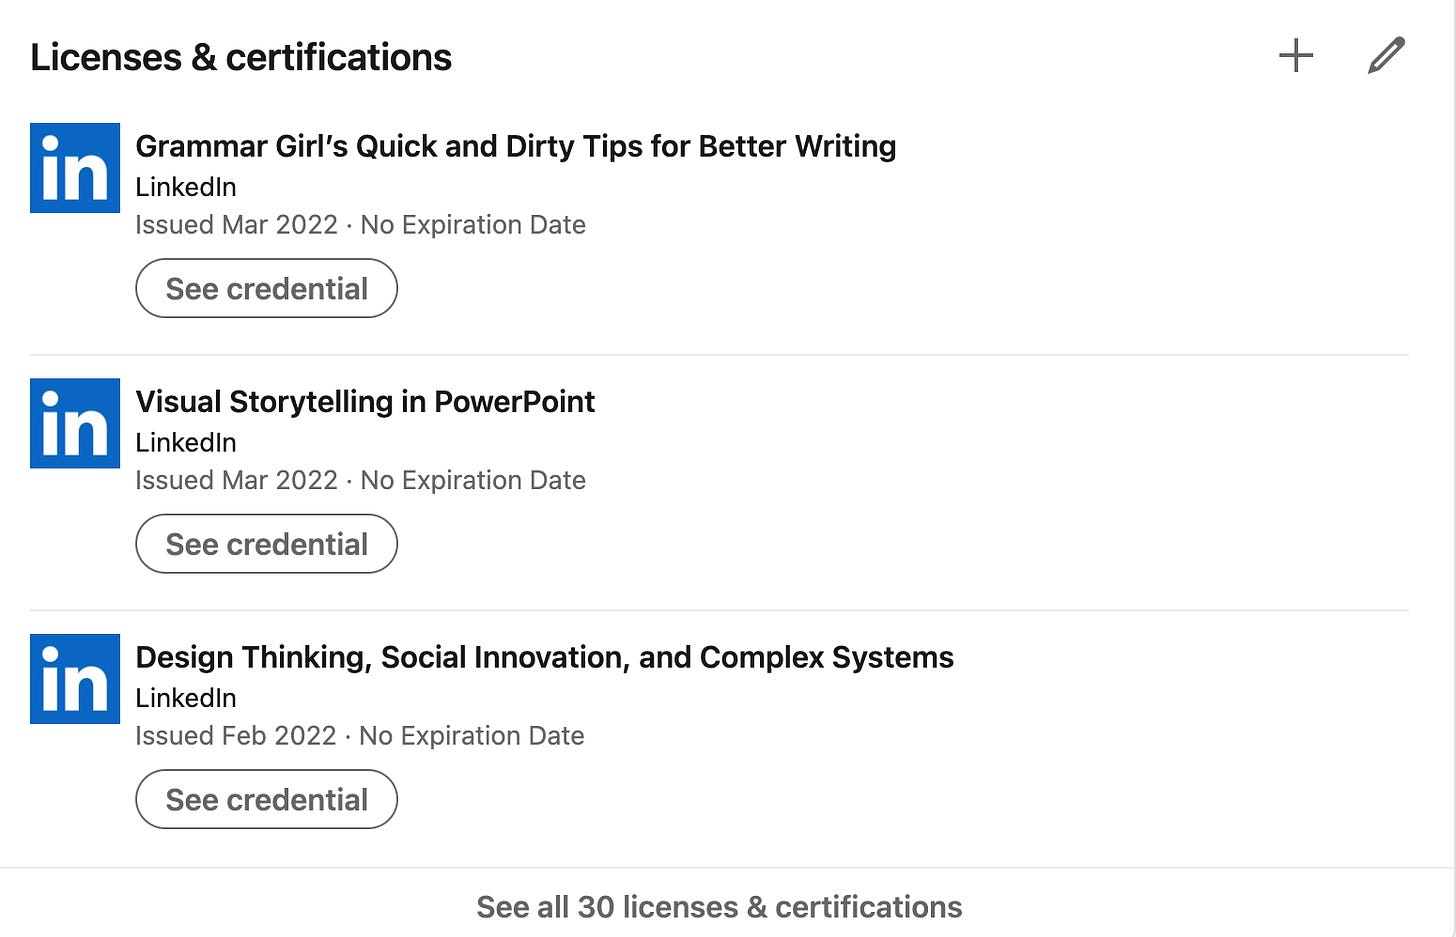 JOe's LinkedIn Learning licences and certifications list from his profile...